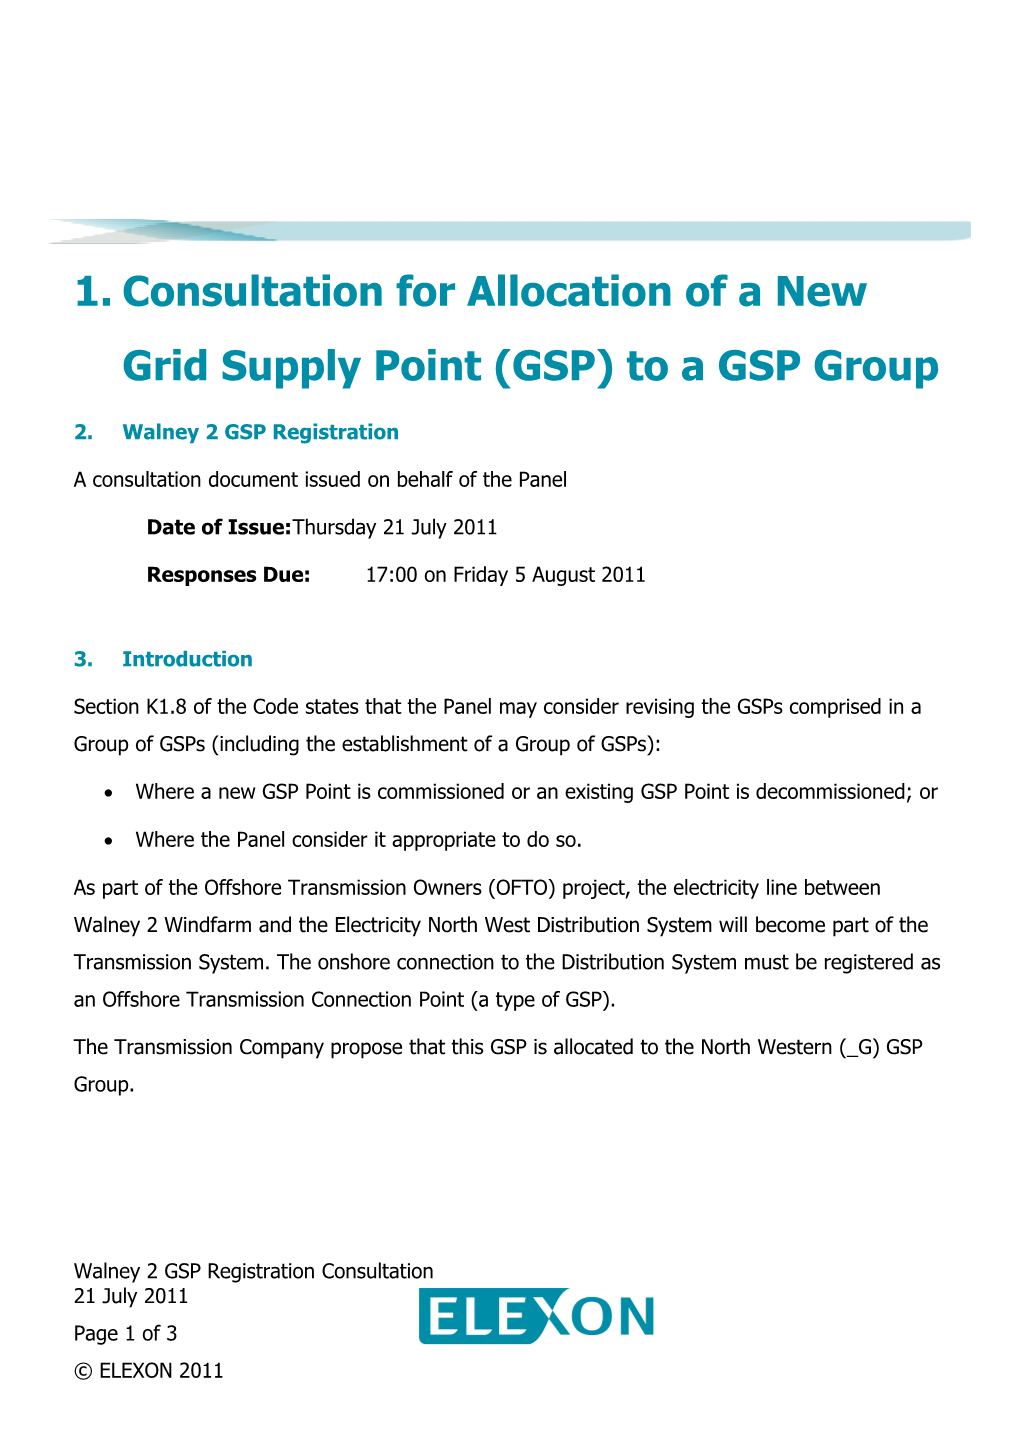 Consultation on the Allocation of a New GSP at Walney 2 to a GSP Group